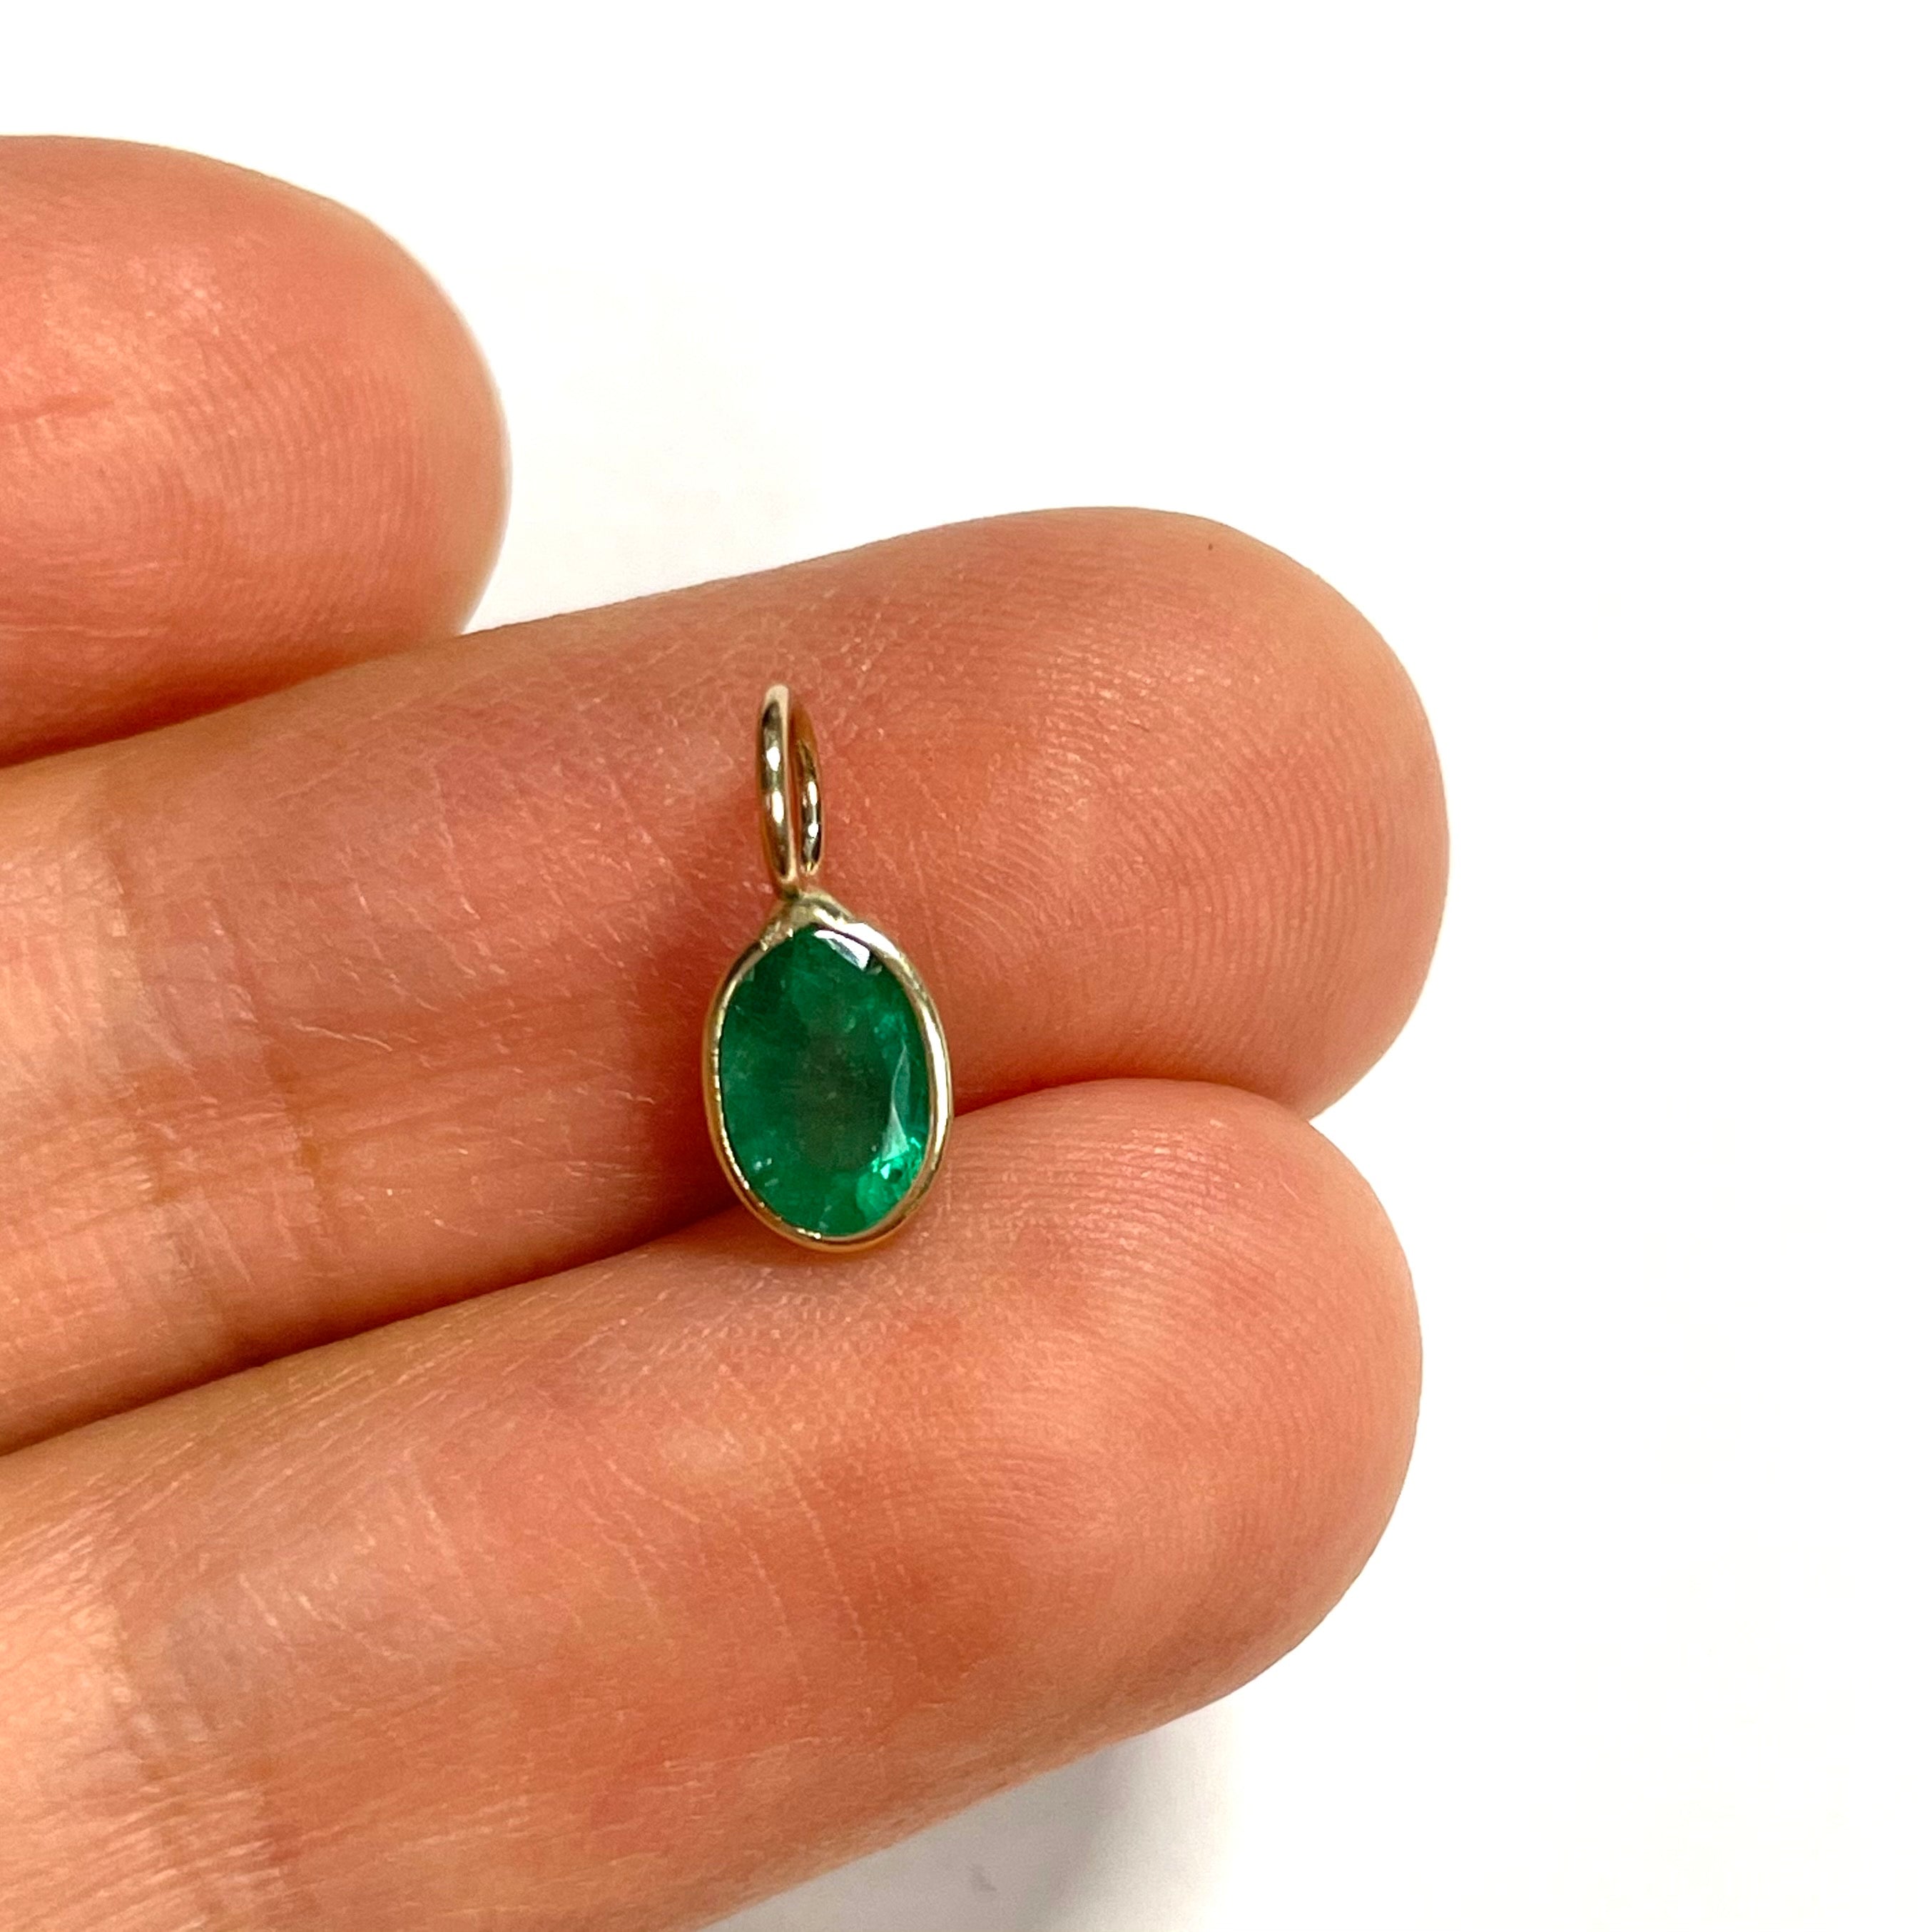 Natural Oval Emerald 14K Yellow Gold Pendant Charm